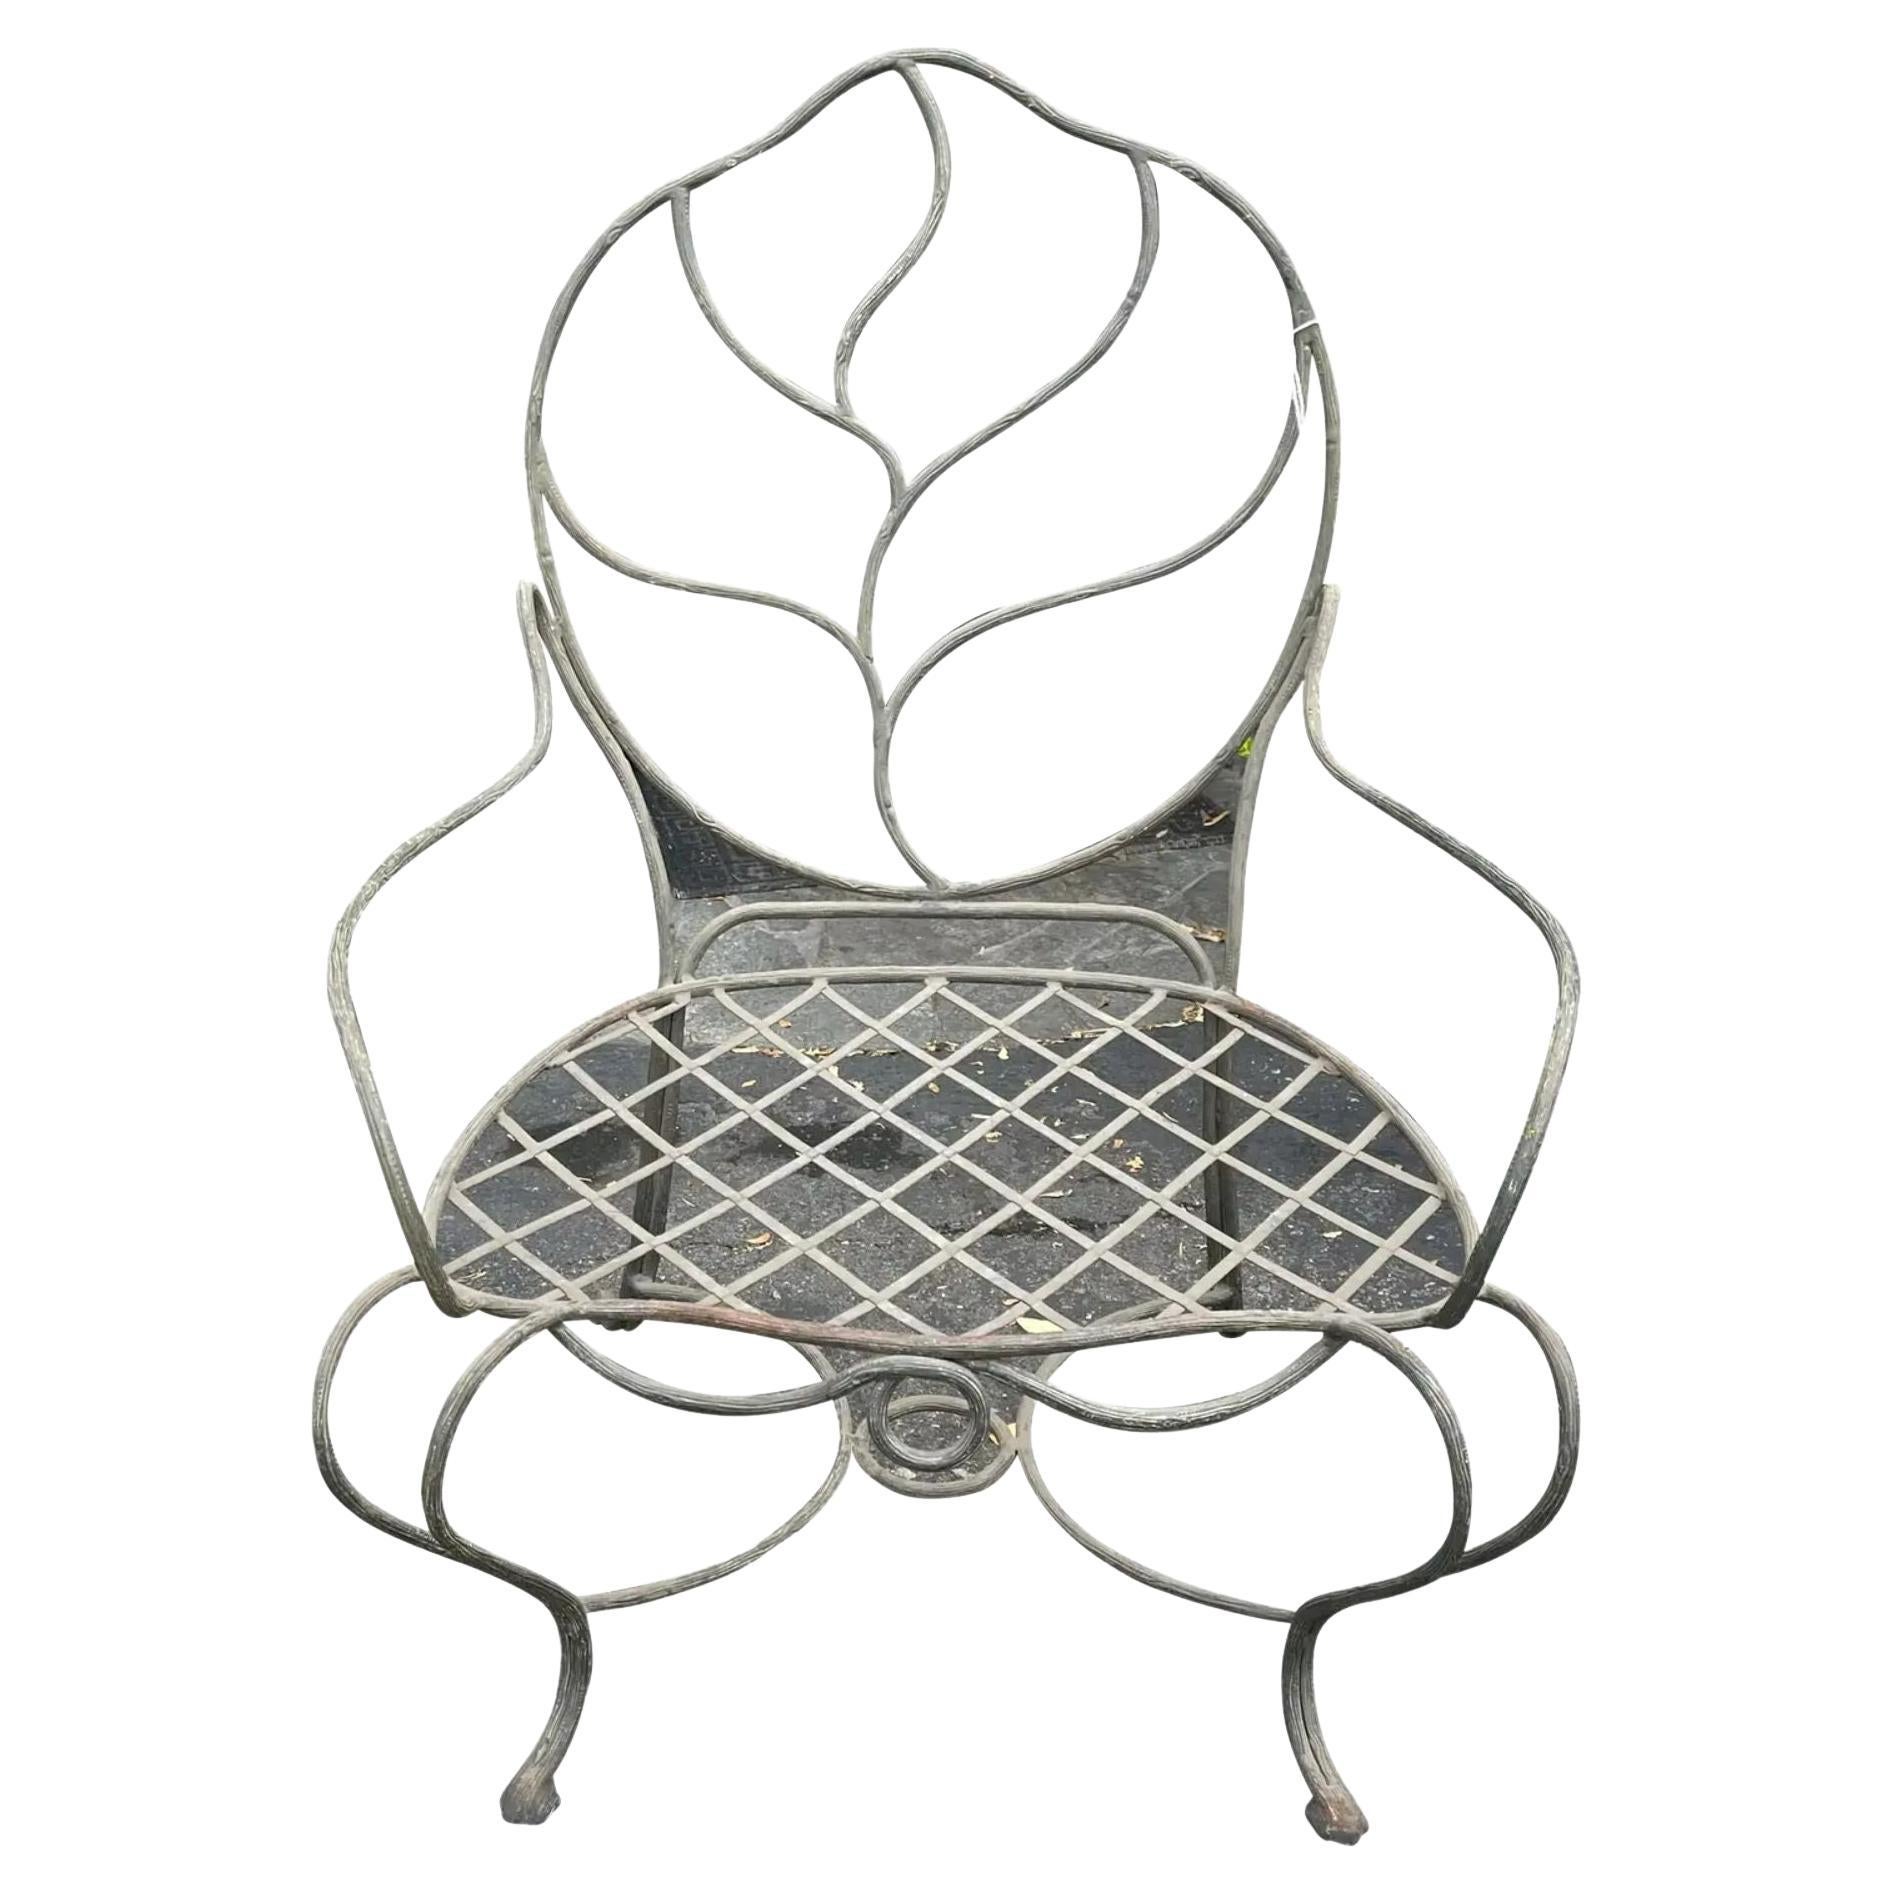 Rustic Italian Gregorius Pineo Wrought Iron Leaf Back Twig Outdoor Chair